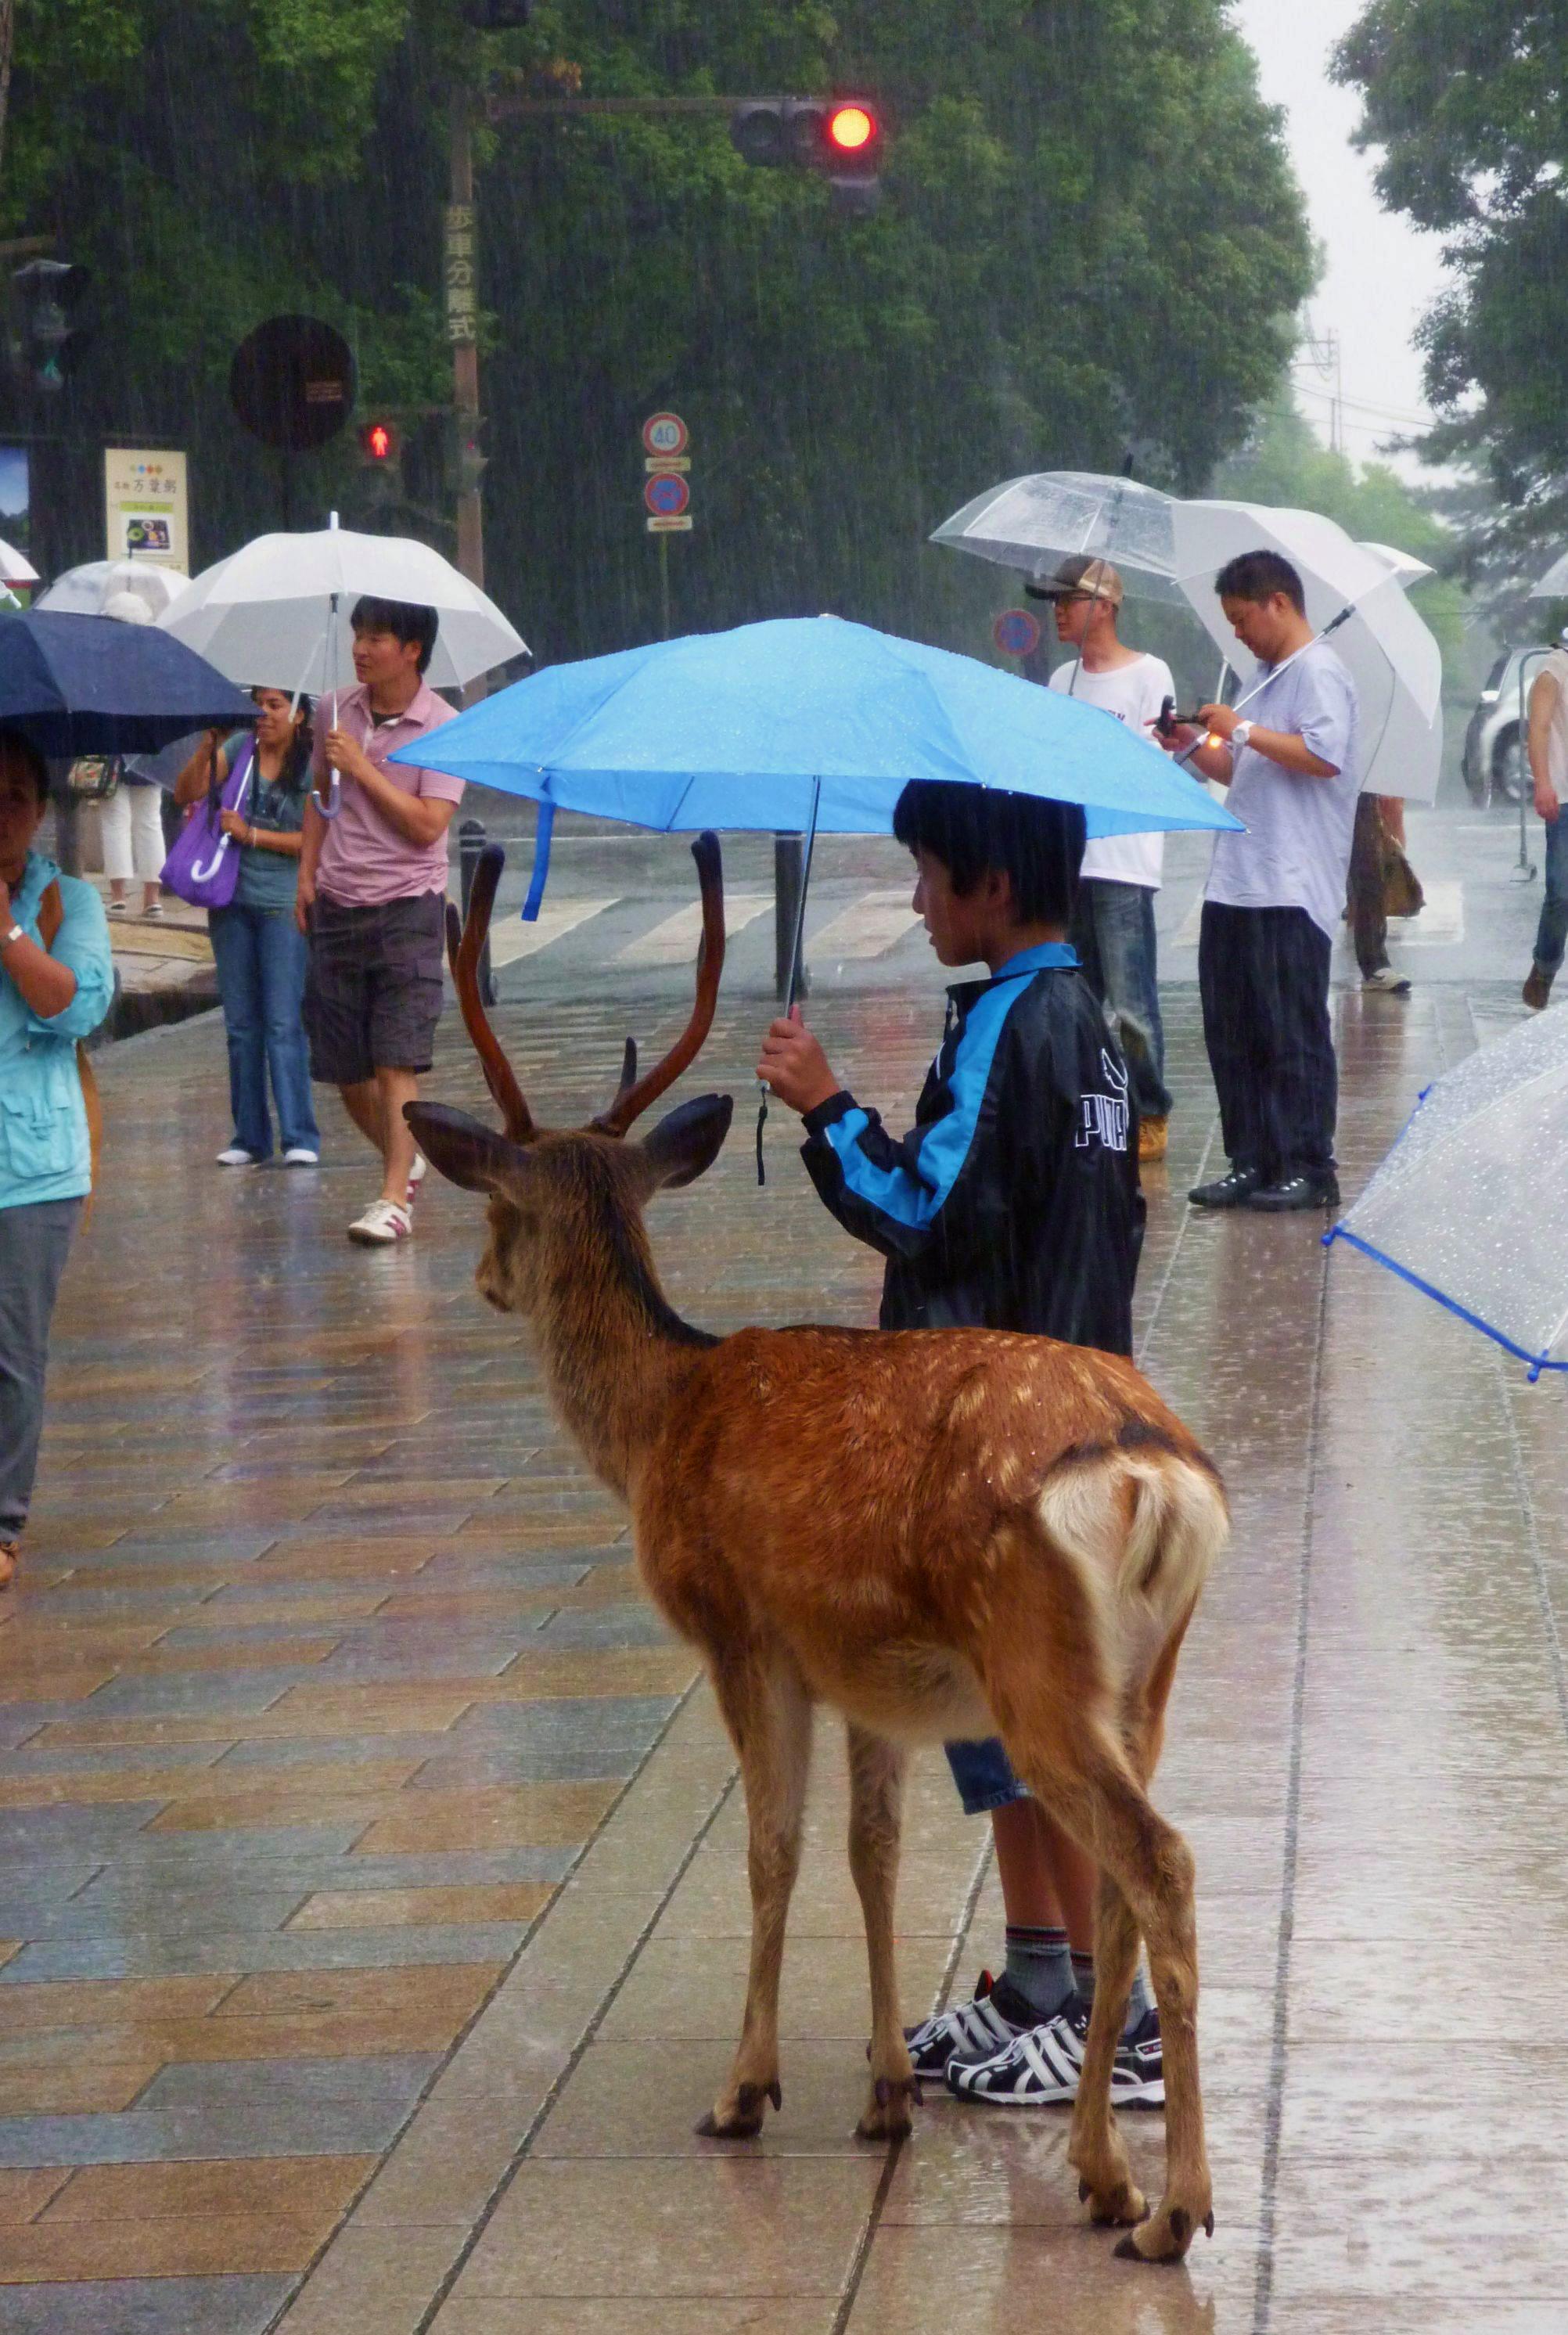 Share an umbrella with friends.